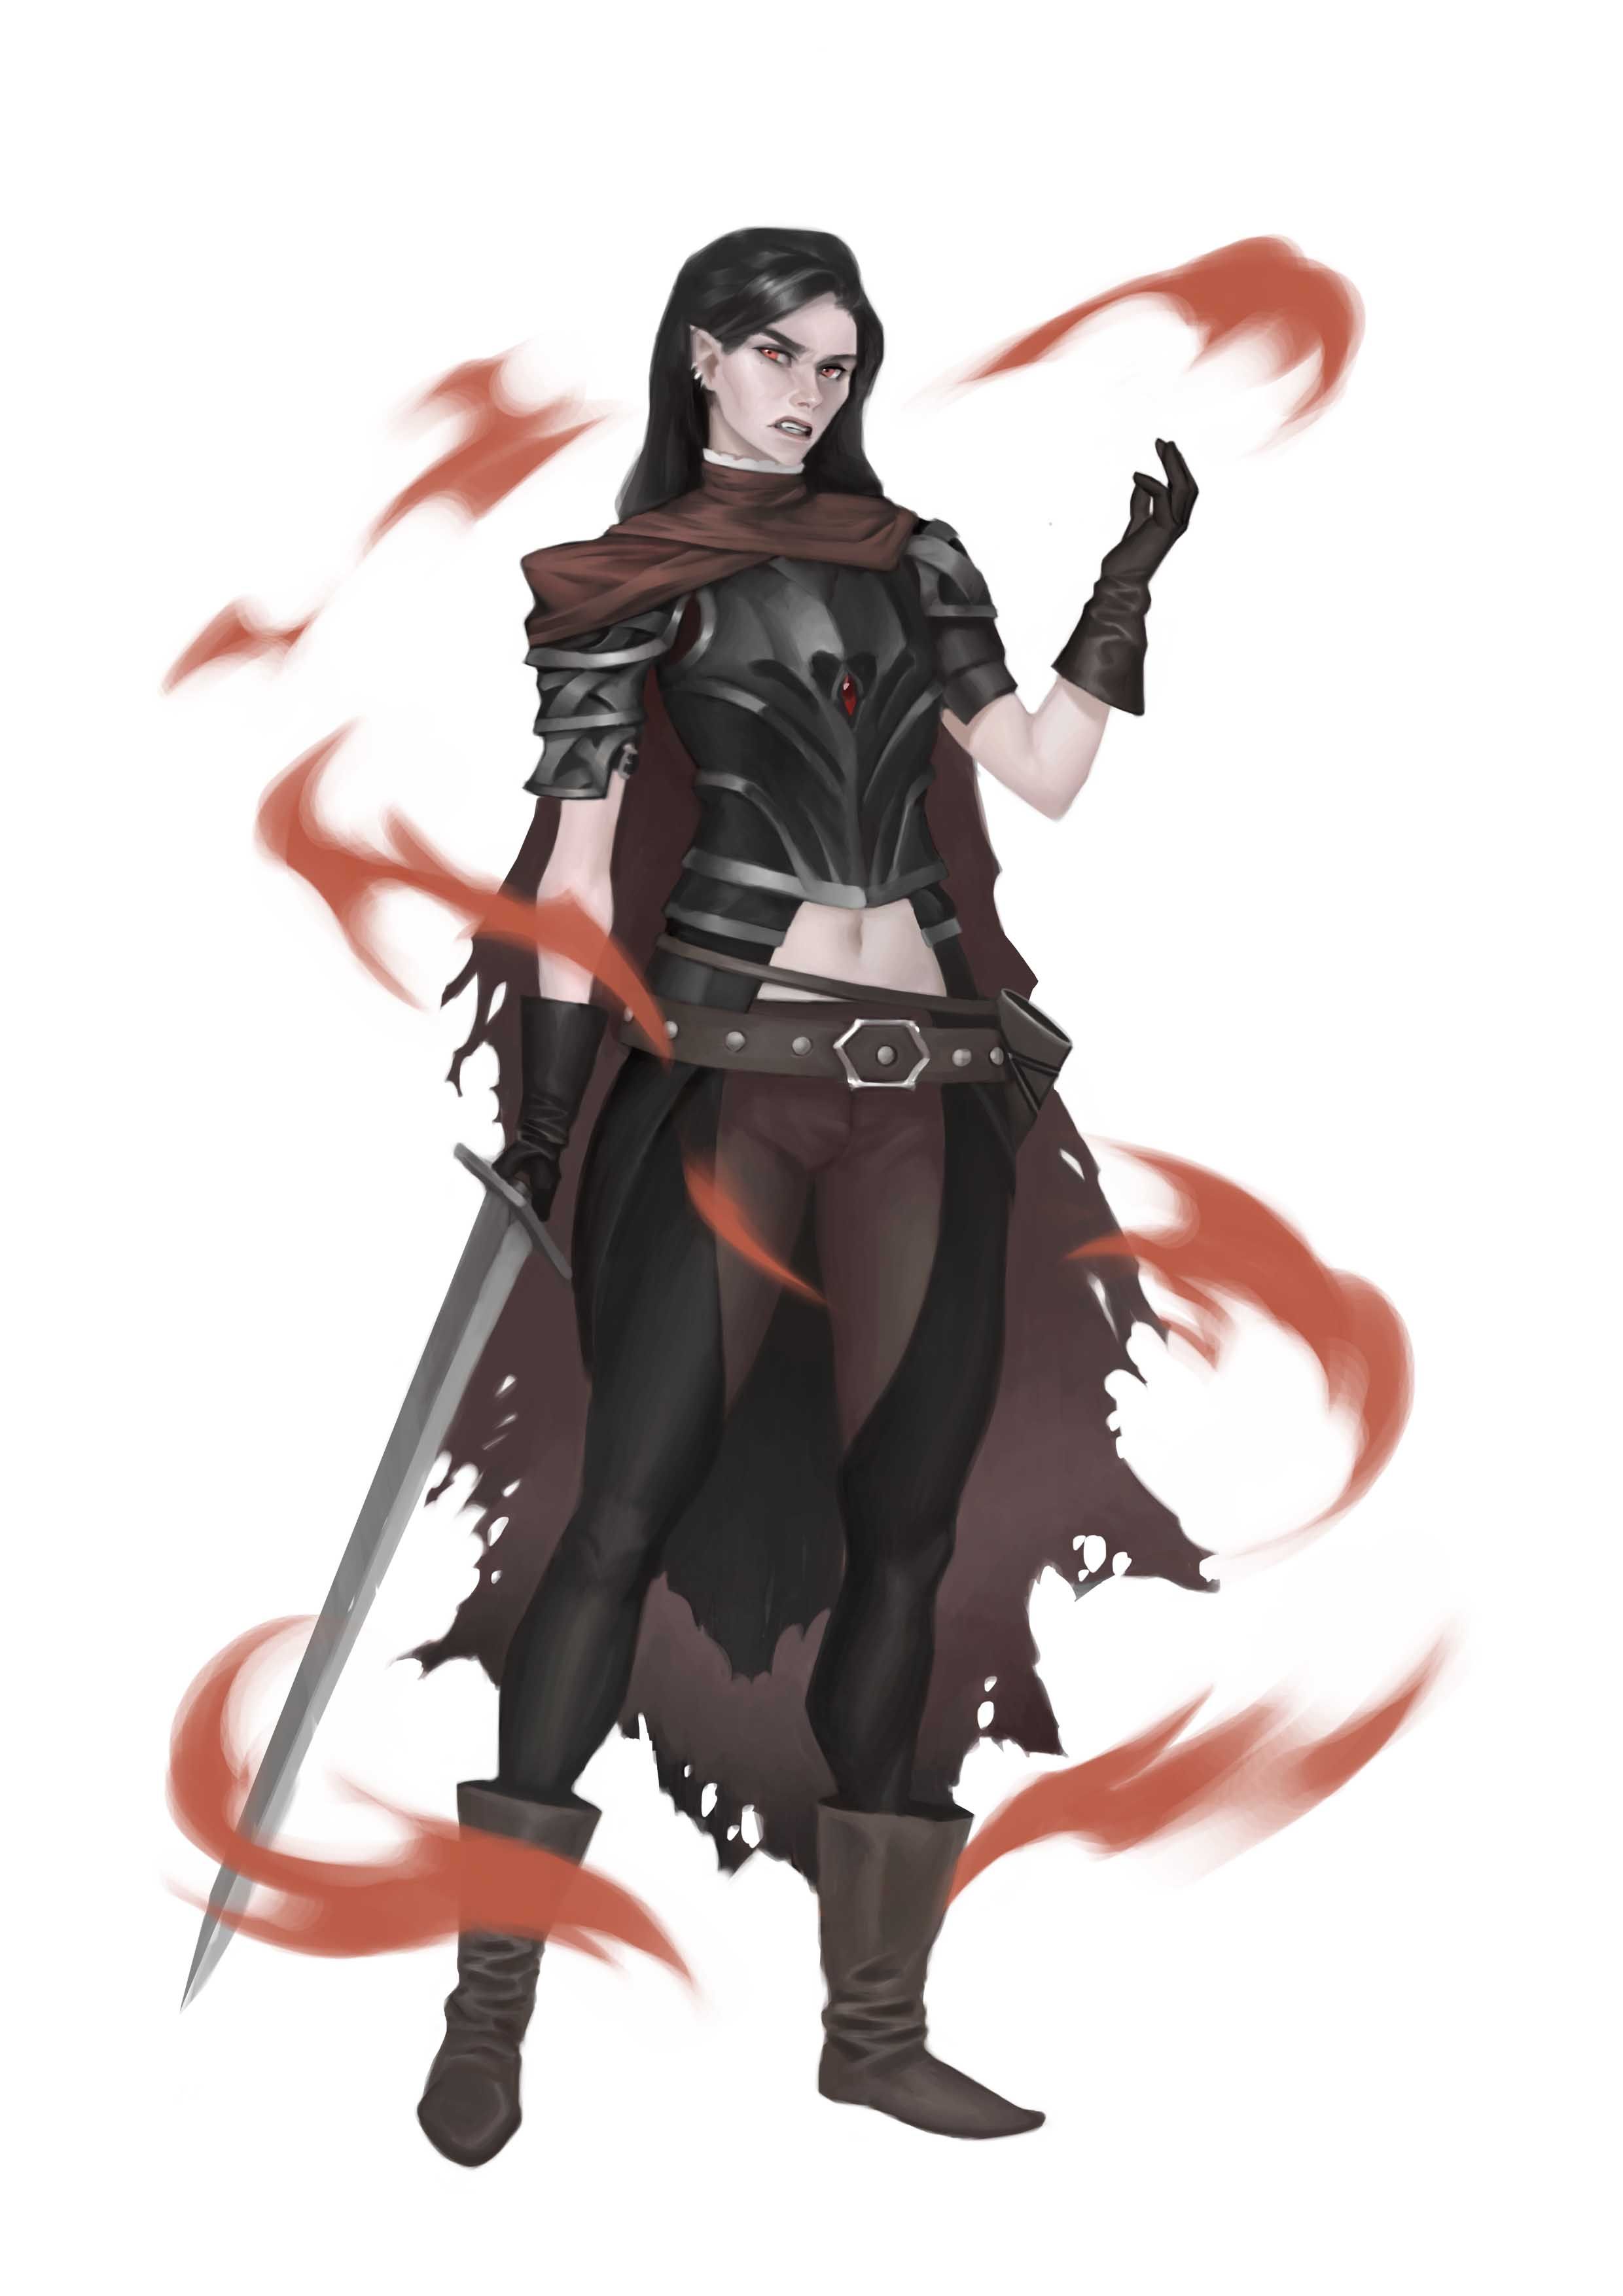 A dhampir in red and black armor, holding a staff